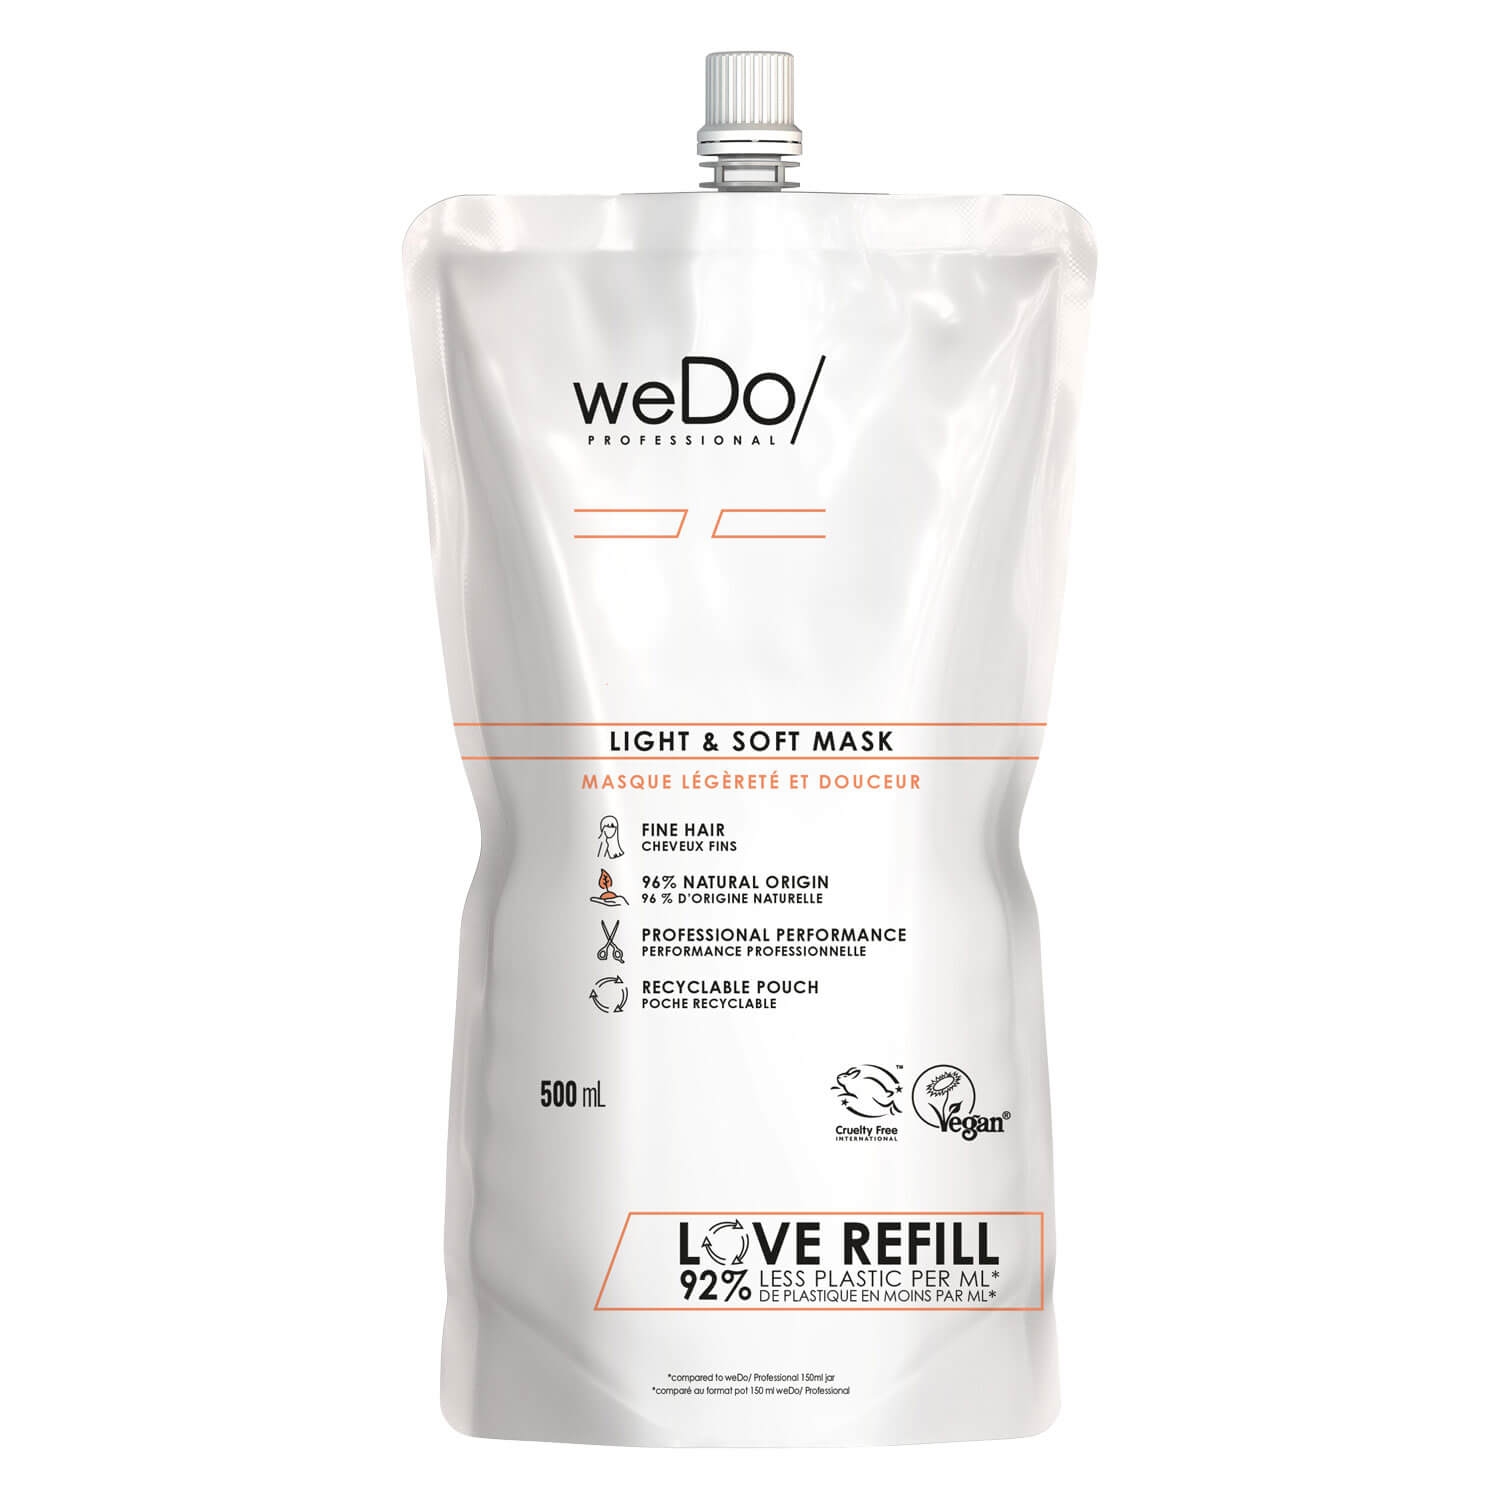 Product image from weDo/ - Light & Soft Mask Refill